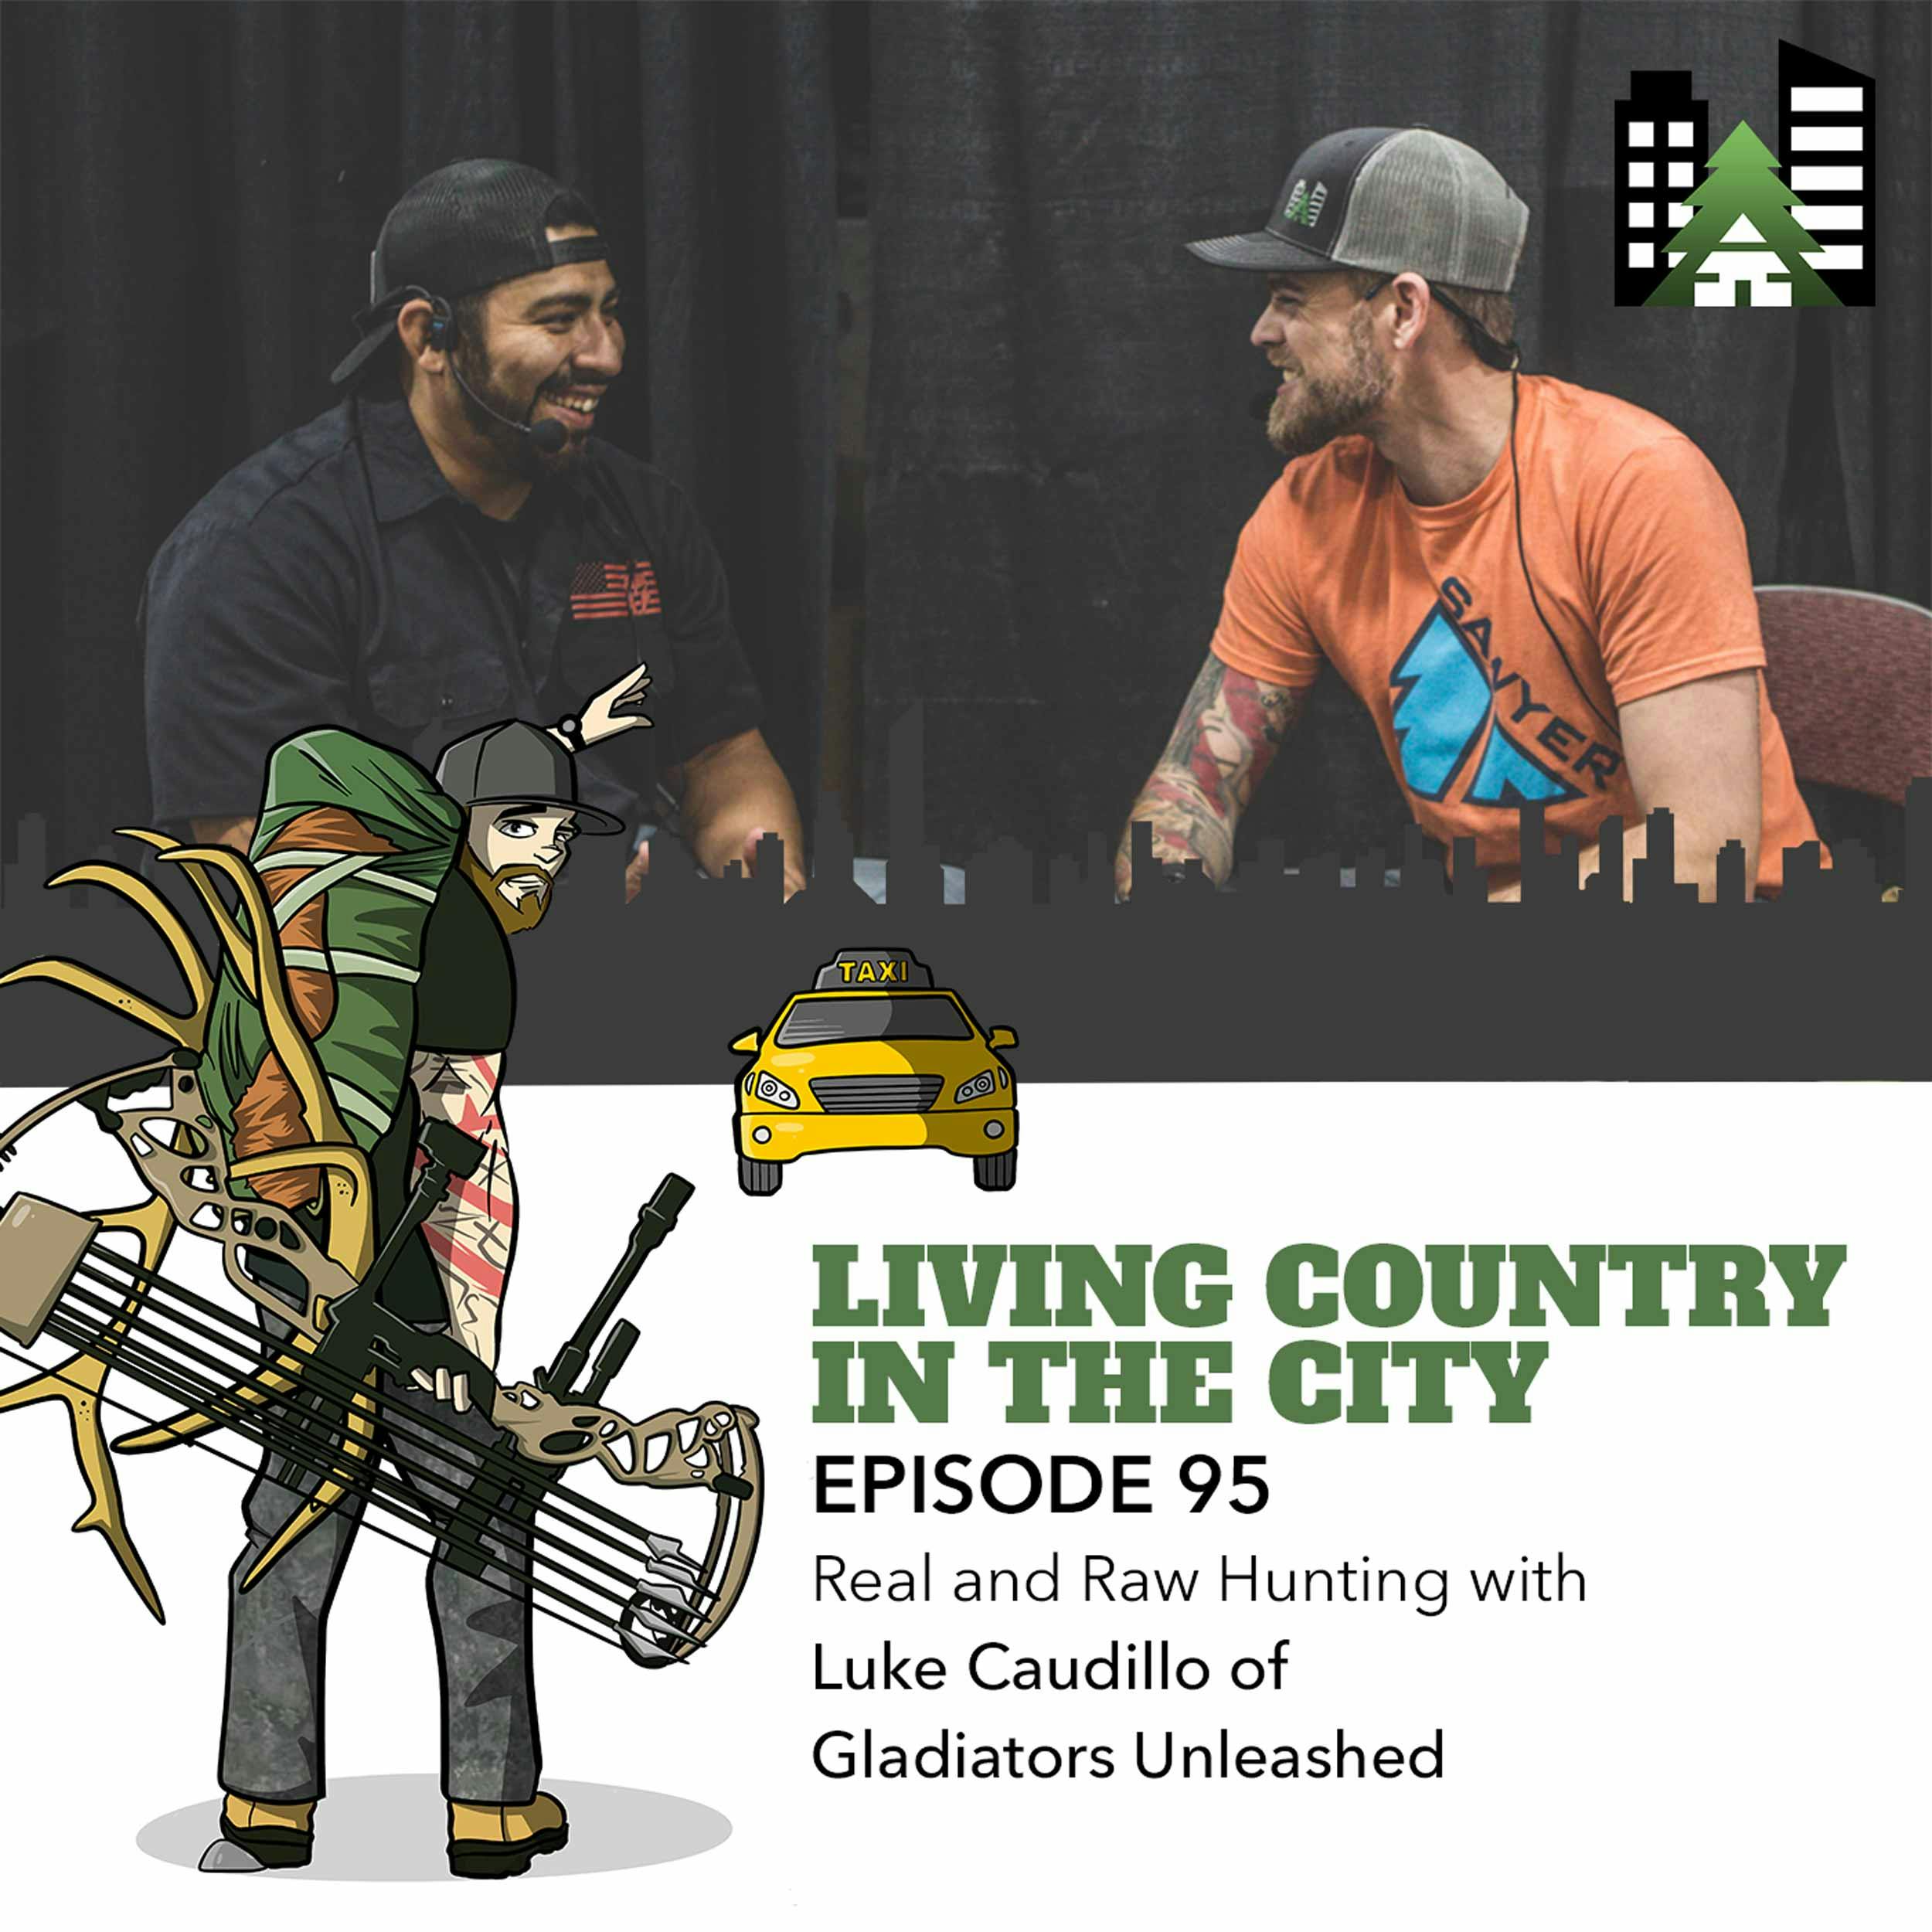 Ep 95 - Real and Raw Hunting with Luke Caudillo of Gladiators Unleashed